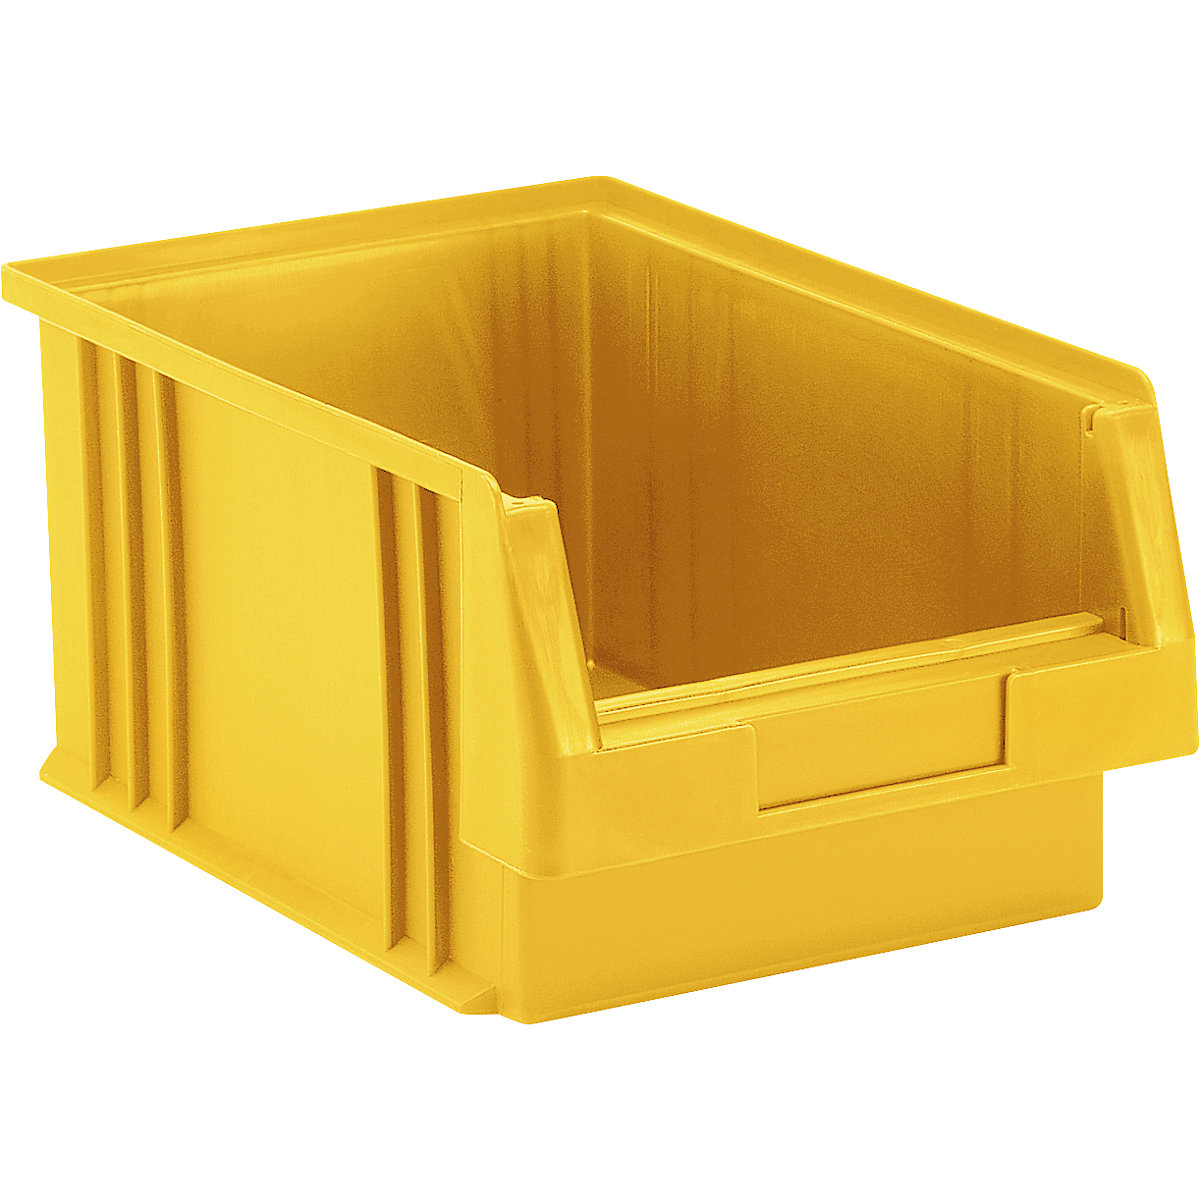 Open fronted storage bin made of polypropylene, 7.4 l capacity, pack of 10, yellow-8